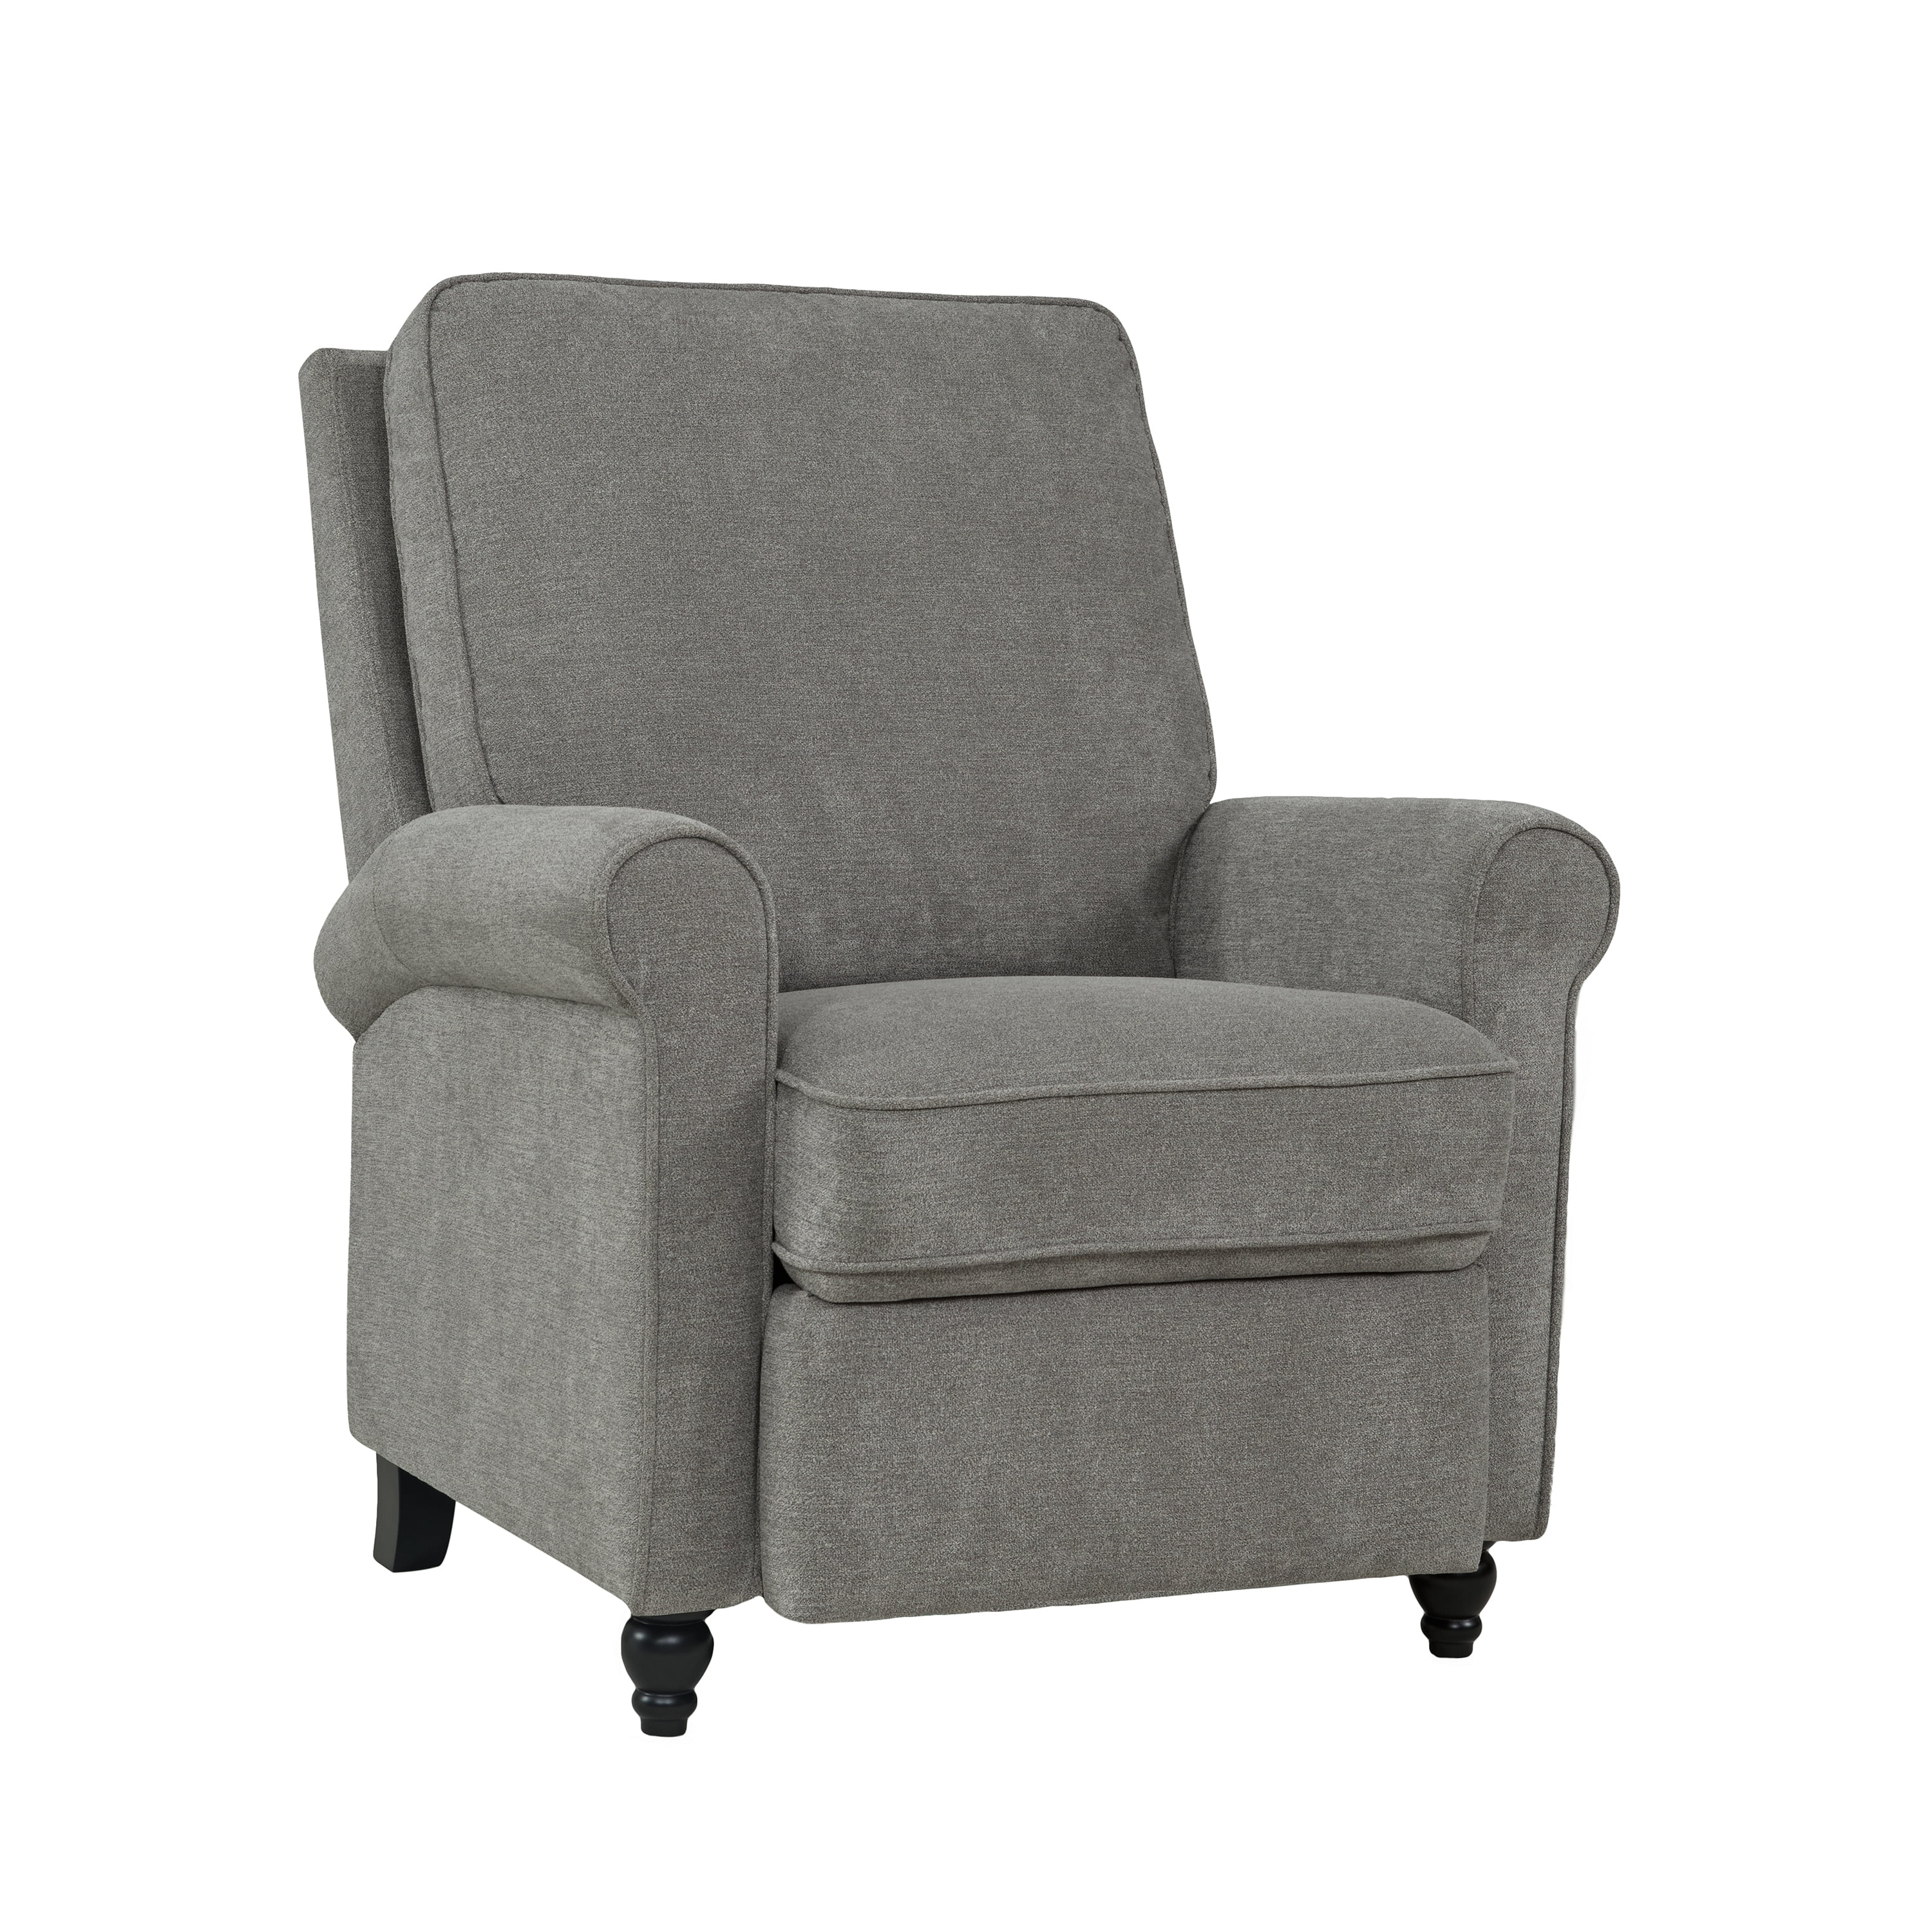 Homesvale Lincoln Push Back Recliner Chair in Warm Gray